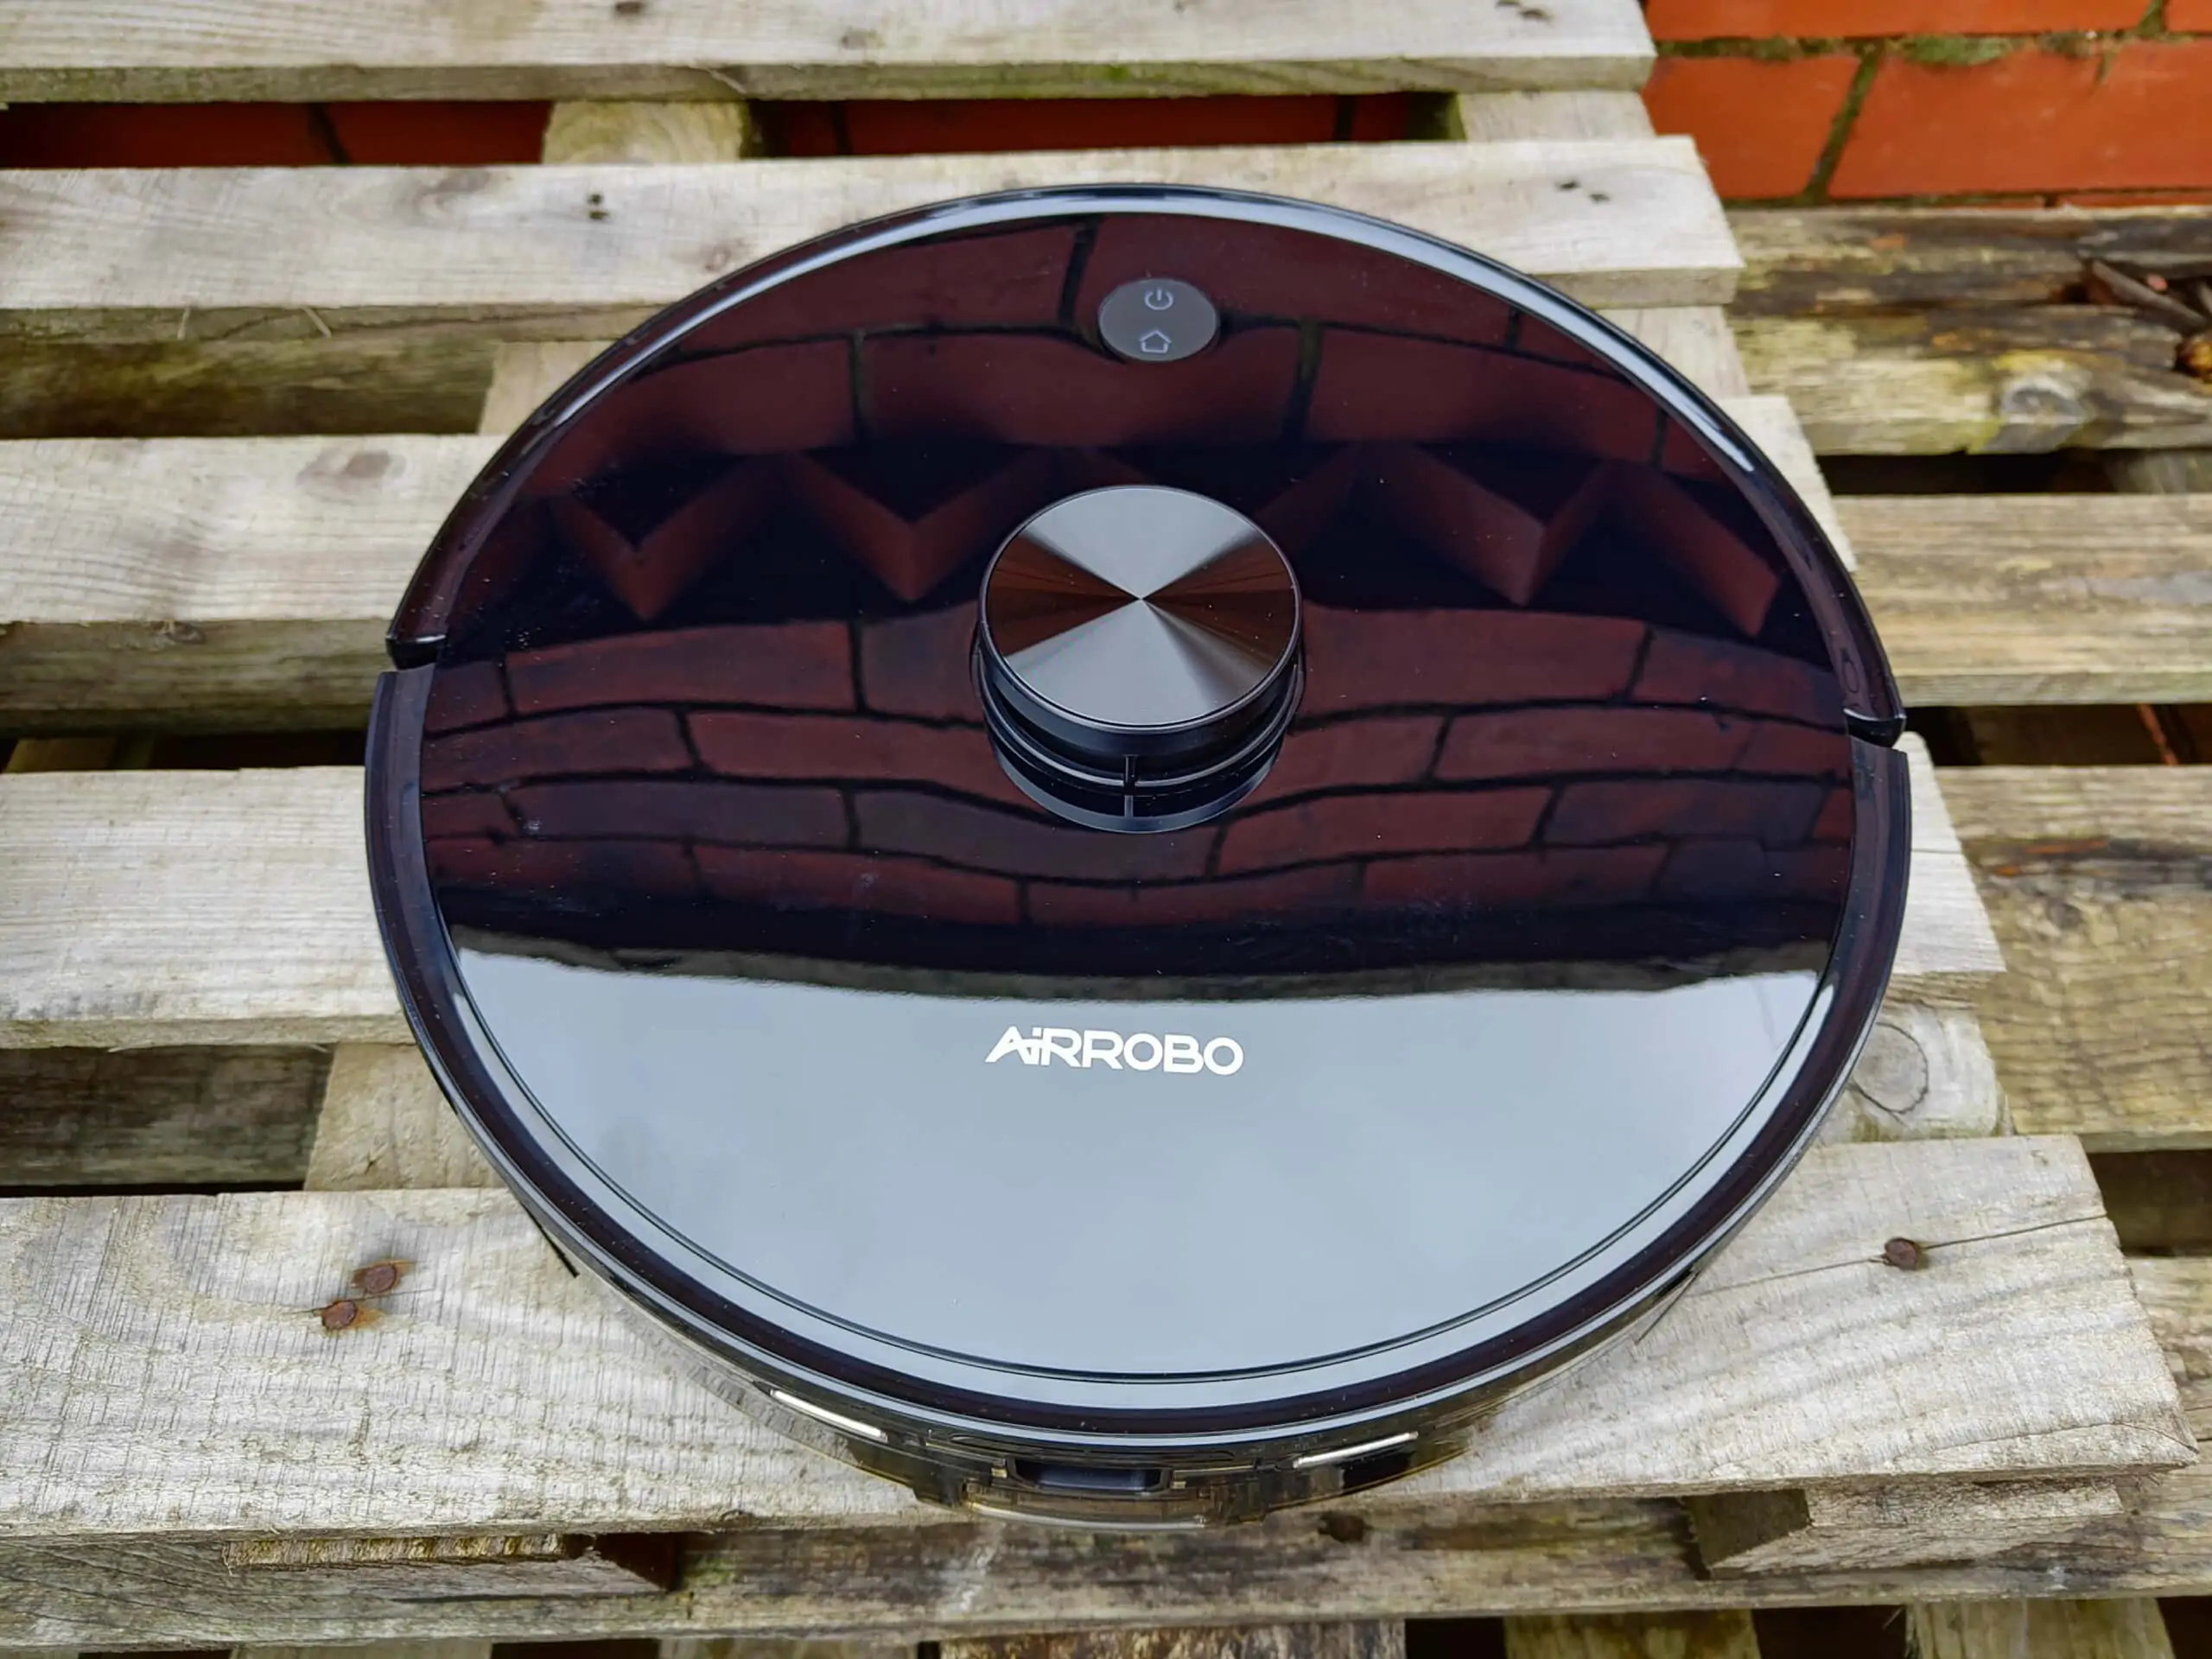 AIRROBO T10 plus self empty review3 scaled - AIRROBO T10+ Self-Empty Robot Vacuum & Mop Review - The cheapest self-emptying smart mapping vacuum on Amazon